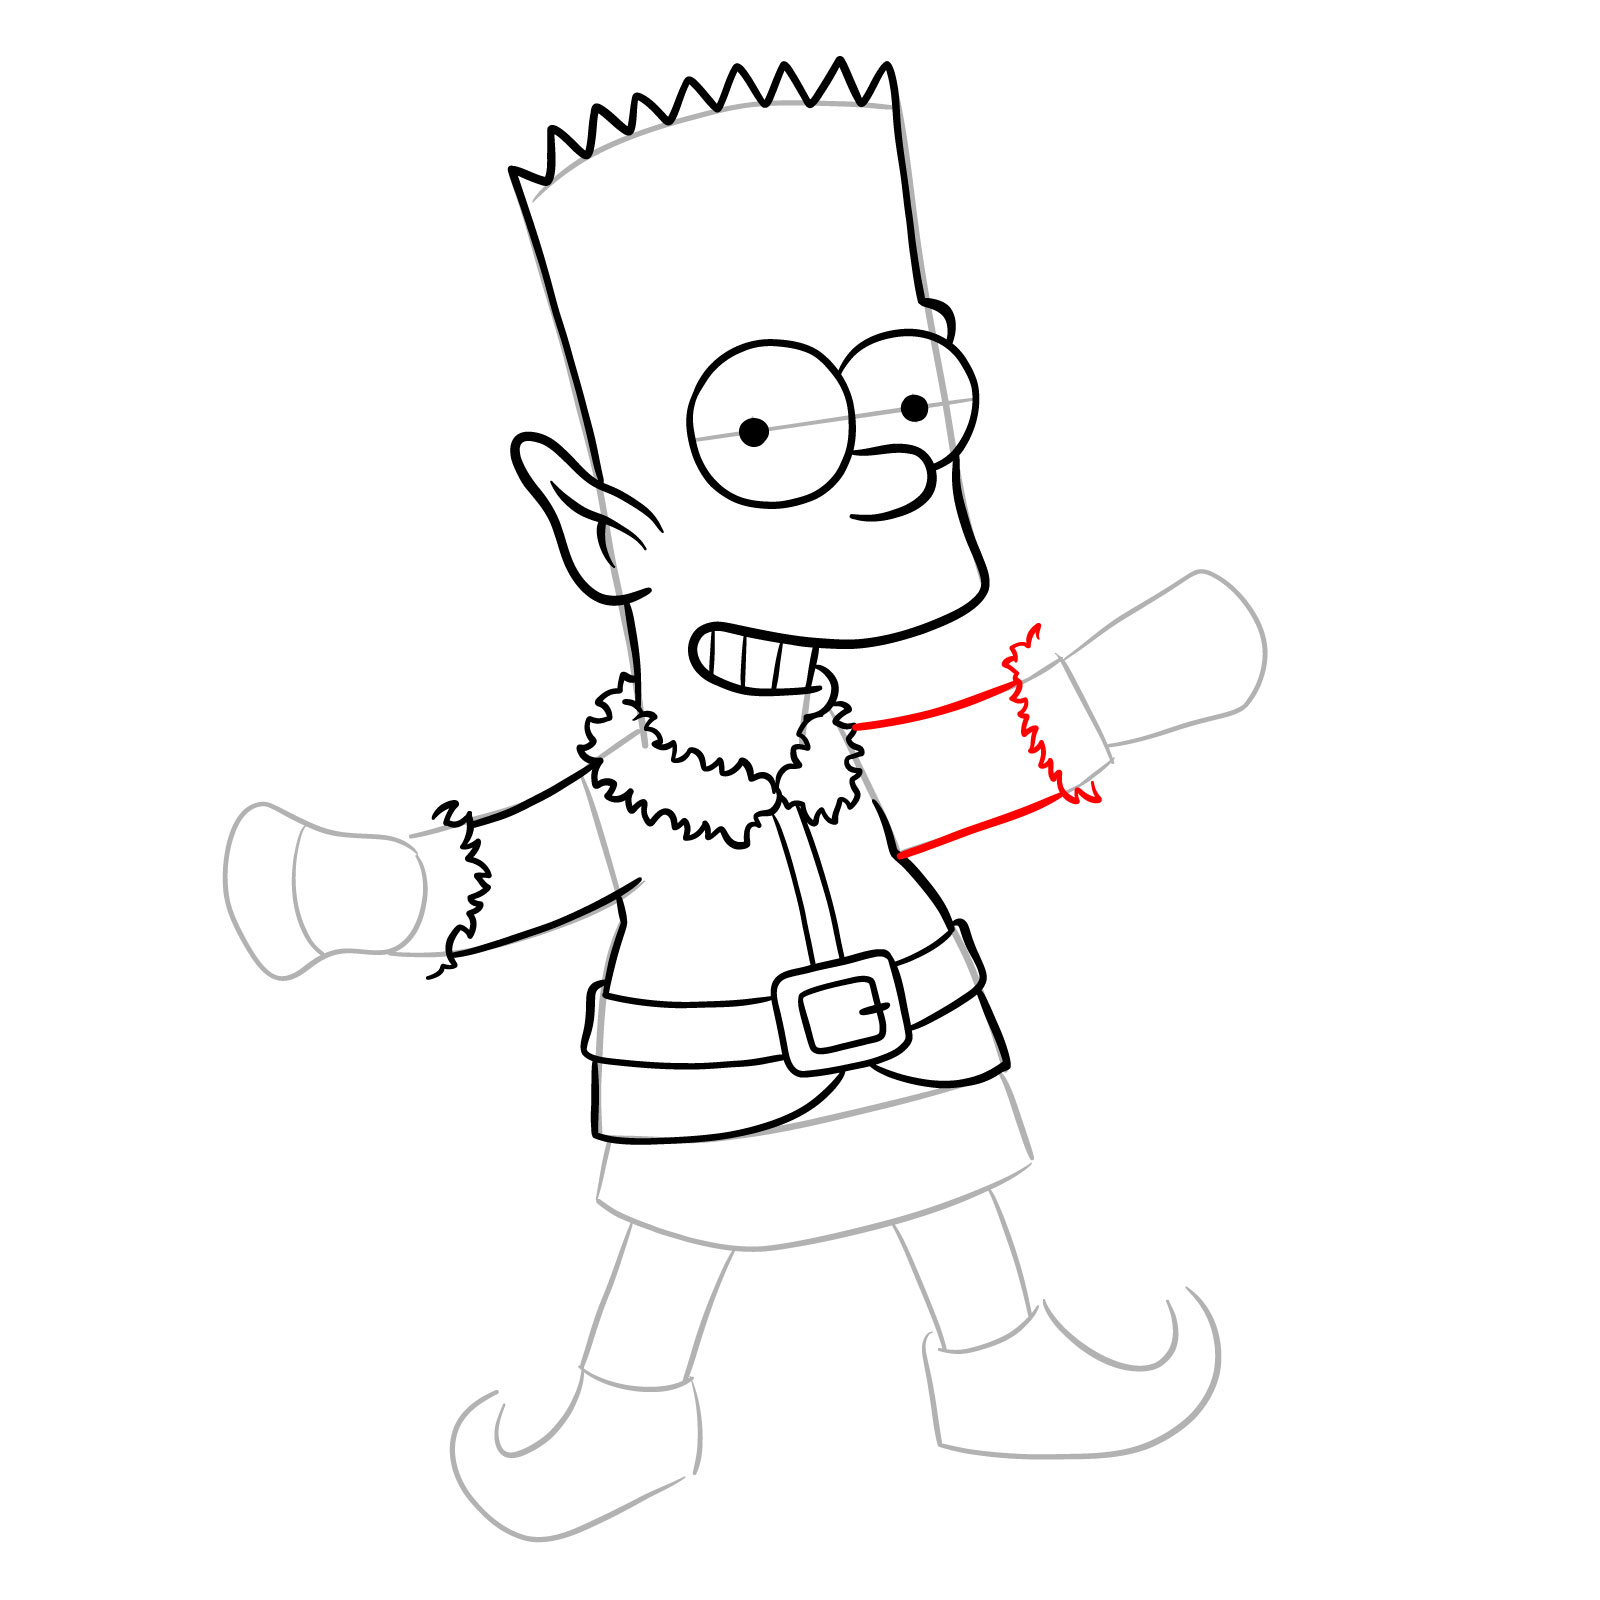 How to draw Bart Simpson as a Christmas Elf - step 19